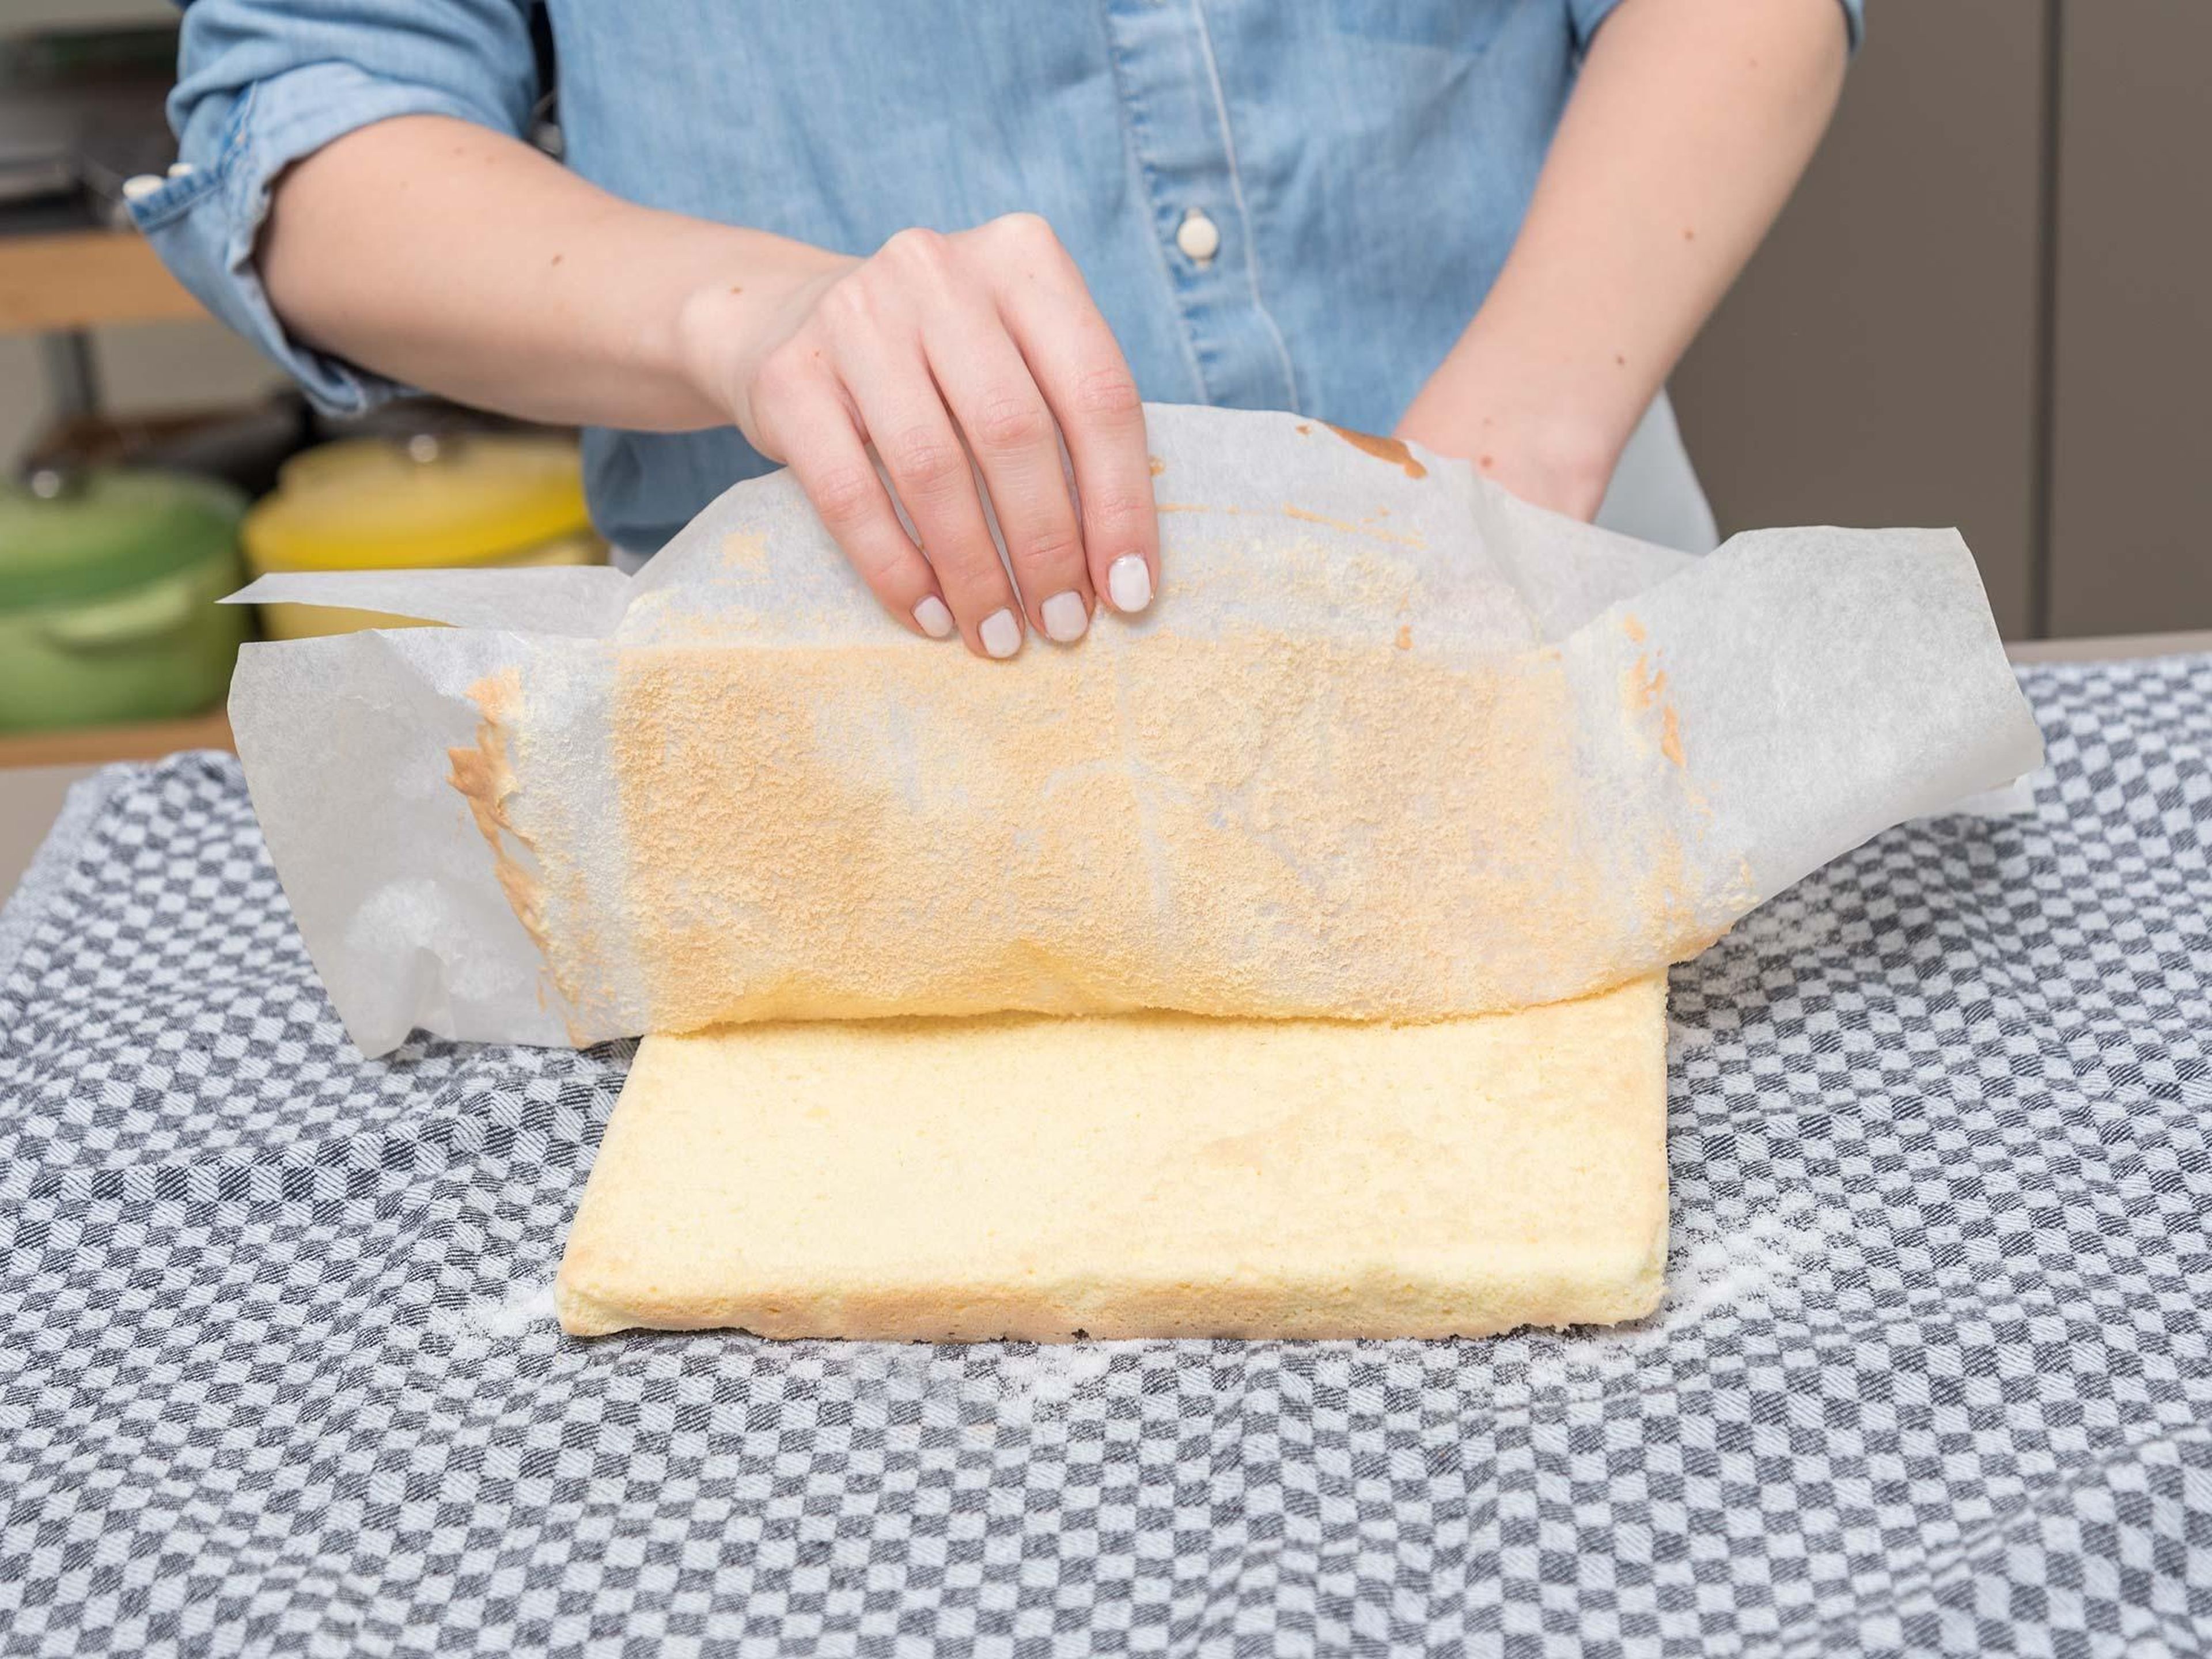 Spread a clean kitchen towel over work surface and sprinkle evenly with sugar. Remove sponge cake from baking pan, turn out onto kitchen towel and peel off parchment paper. Set aside to cool completely.